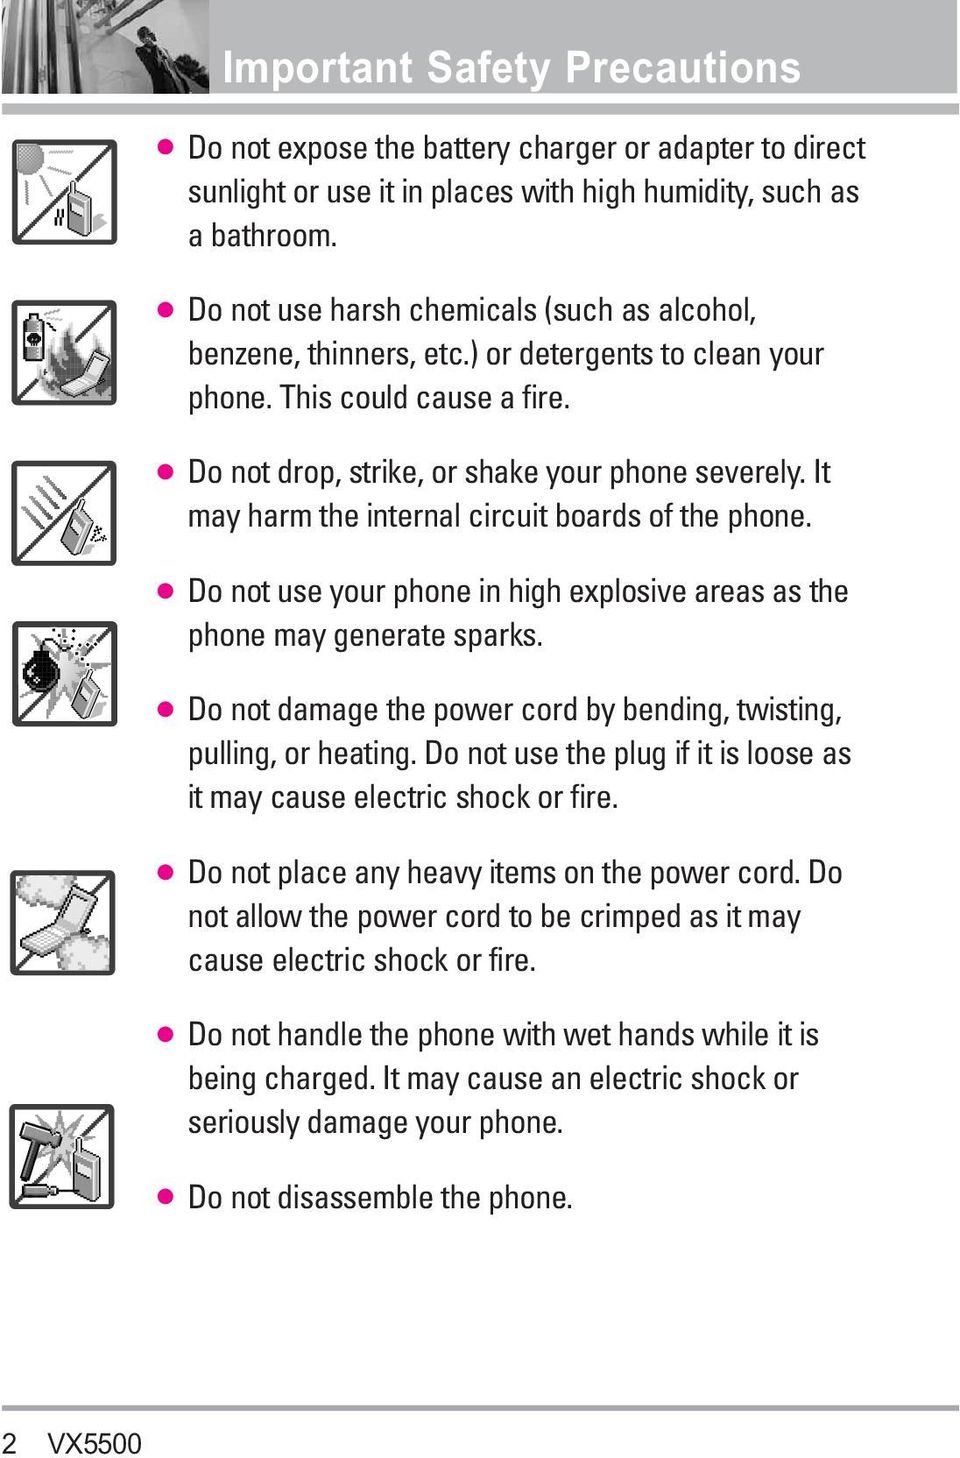 It may harm the internal circuit boards of the phone. Do not use your phone in high explosive areas as the phone may generate sparks.